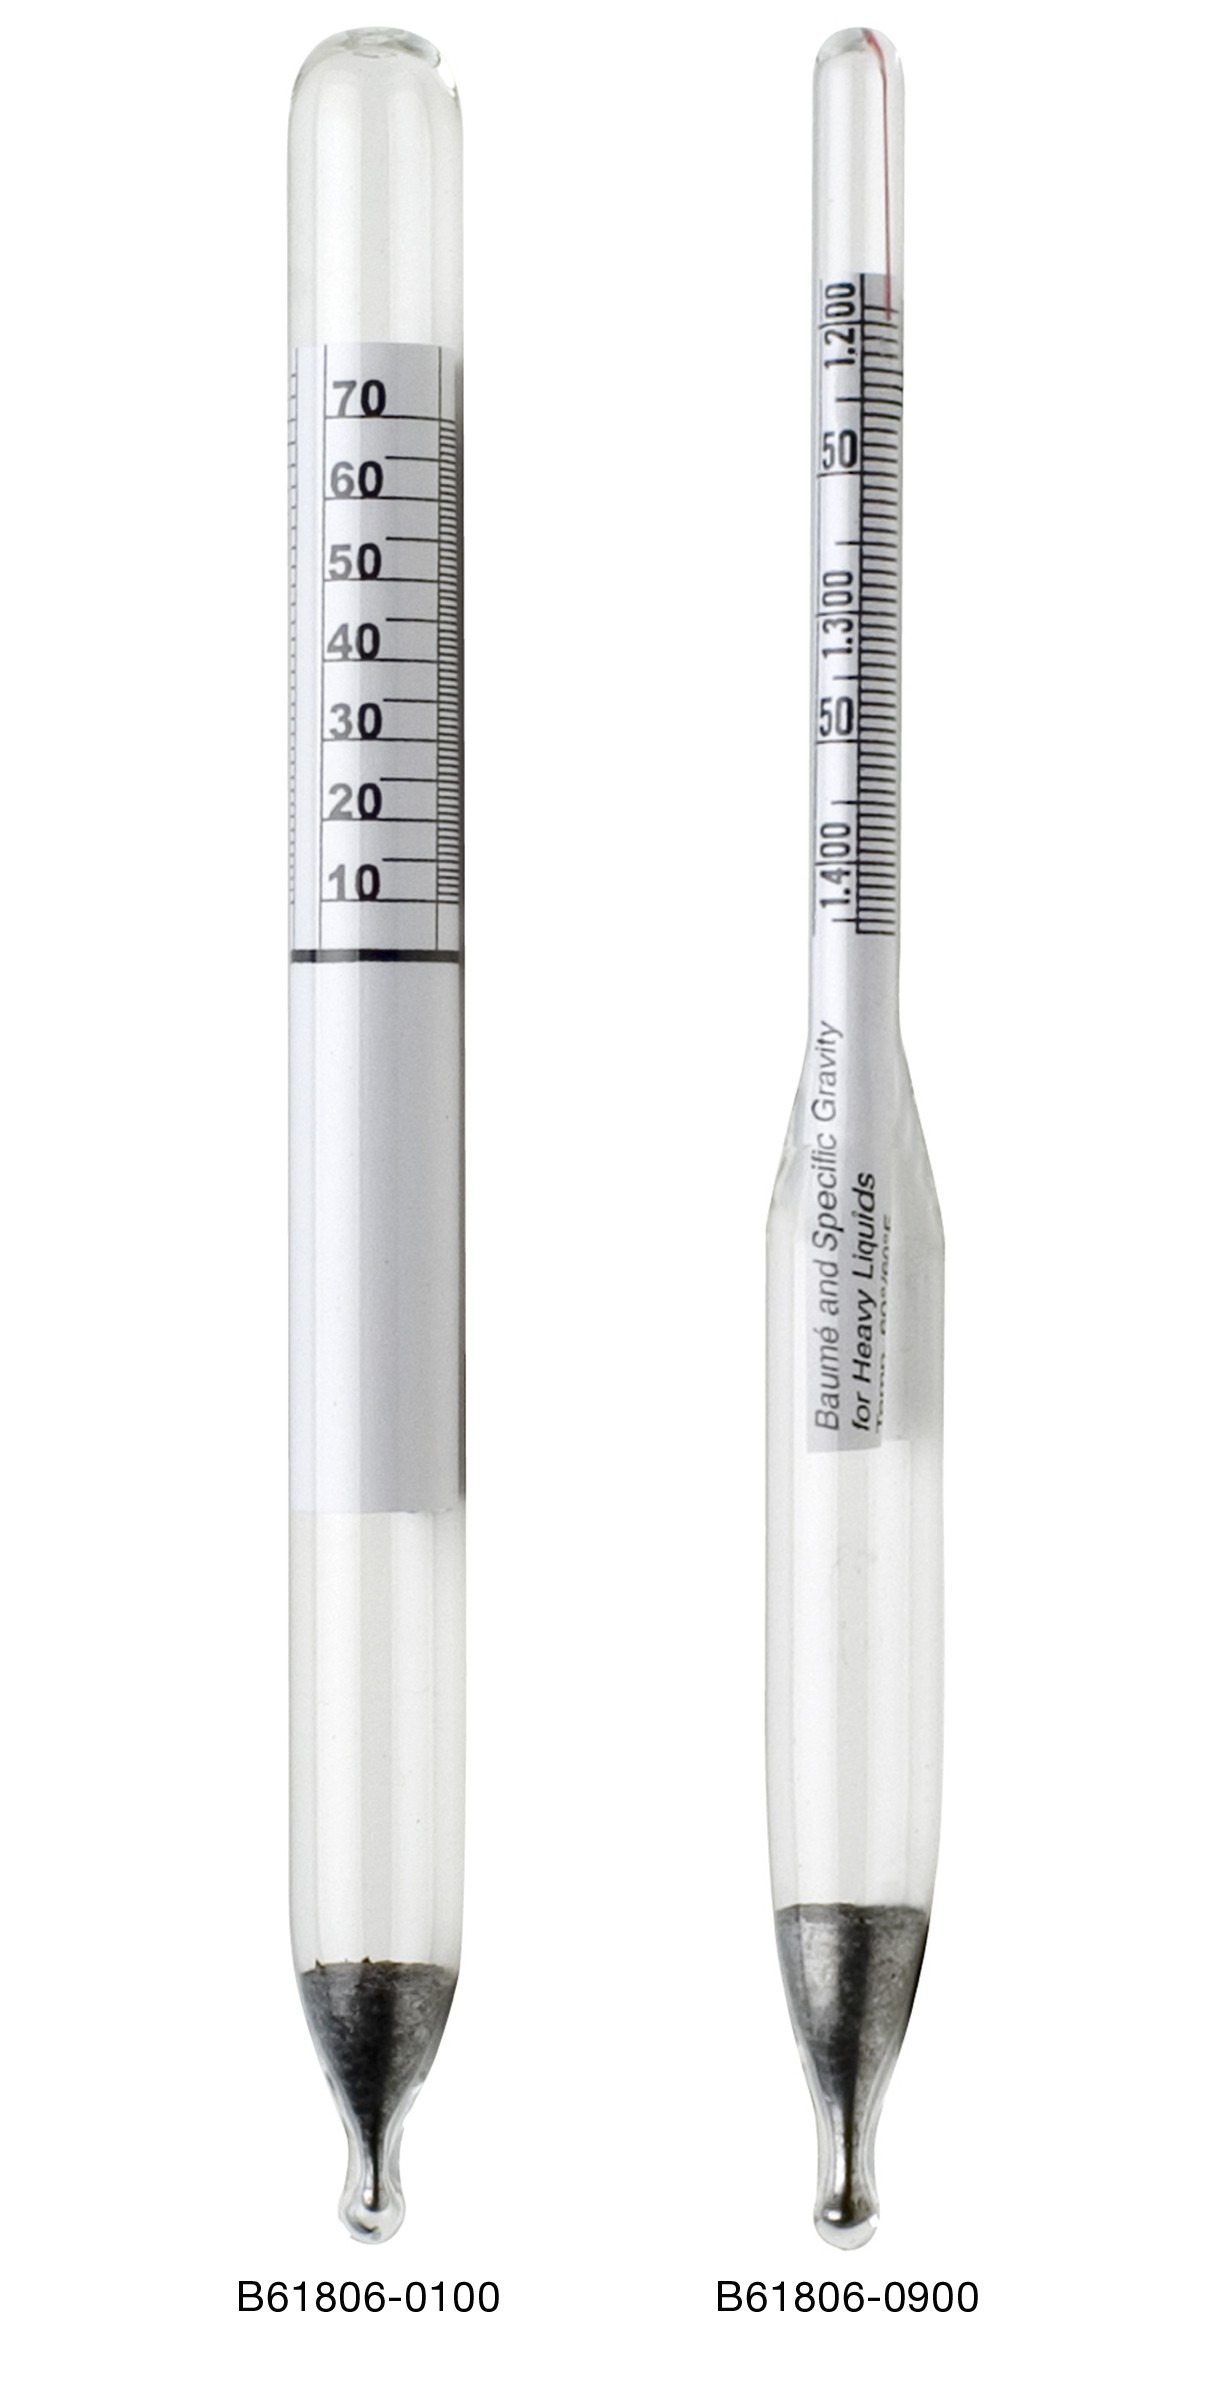 SP Bel-Art, H-B DURAC 0.700/1.000 Specific Gravity and 10/70 Degree Baume Dual Scale Hydrometer for Liquids Lighter Than Water